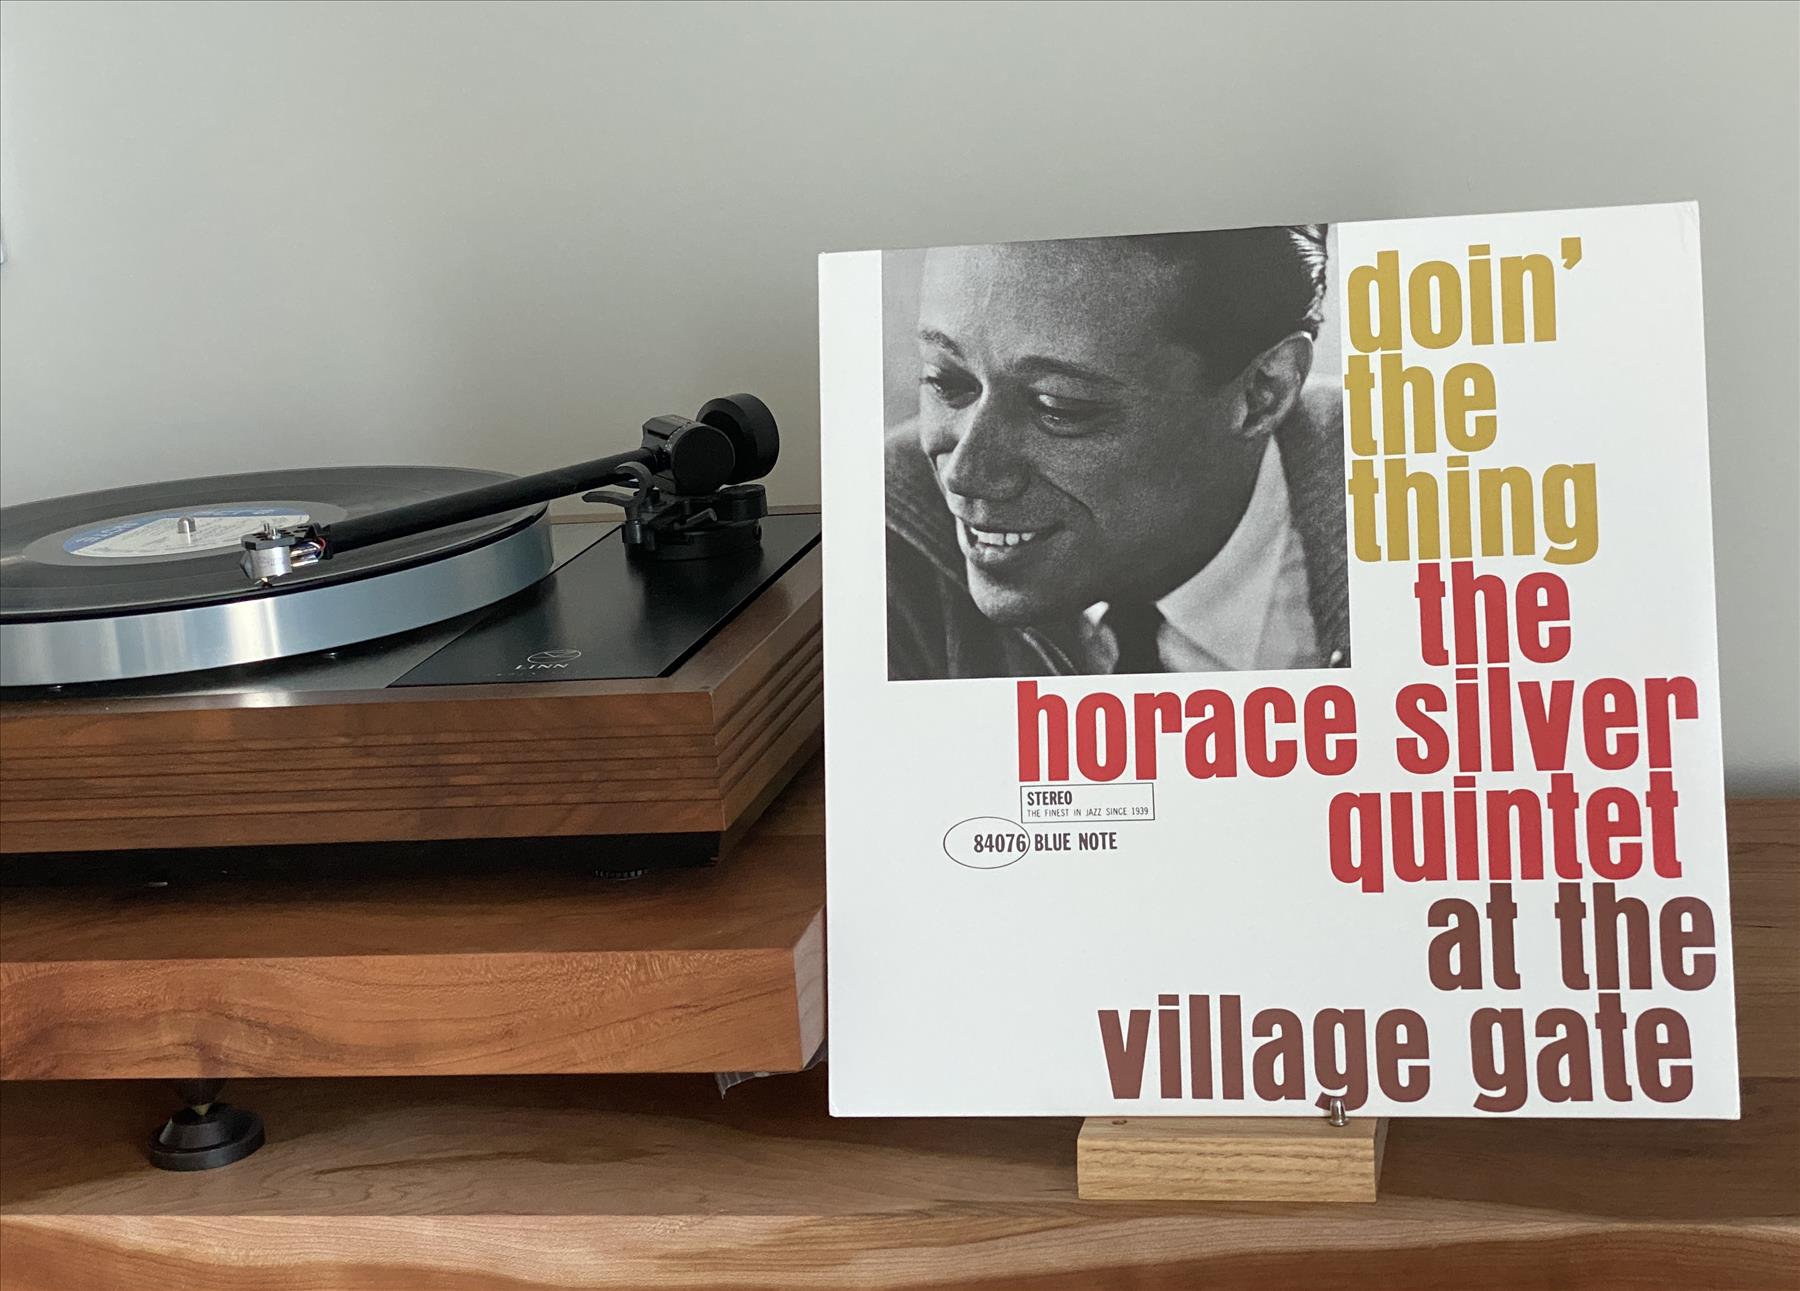 Horace Silver: Swinging, grooving master of hard bop piano